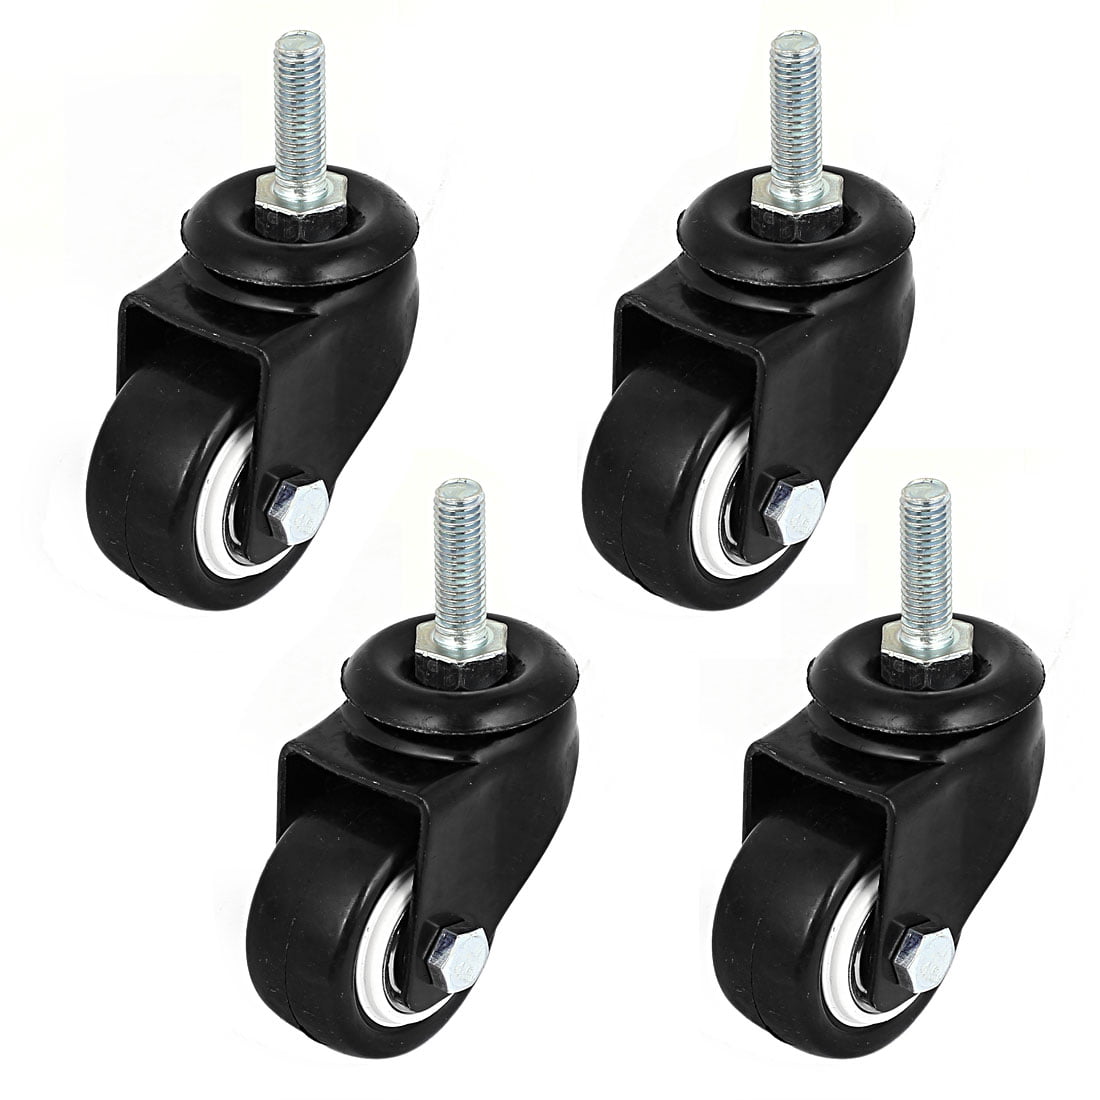 4pcs/set 1.5" furniture swivel casters/wheels crafts office chairs furniture 